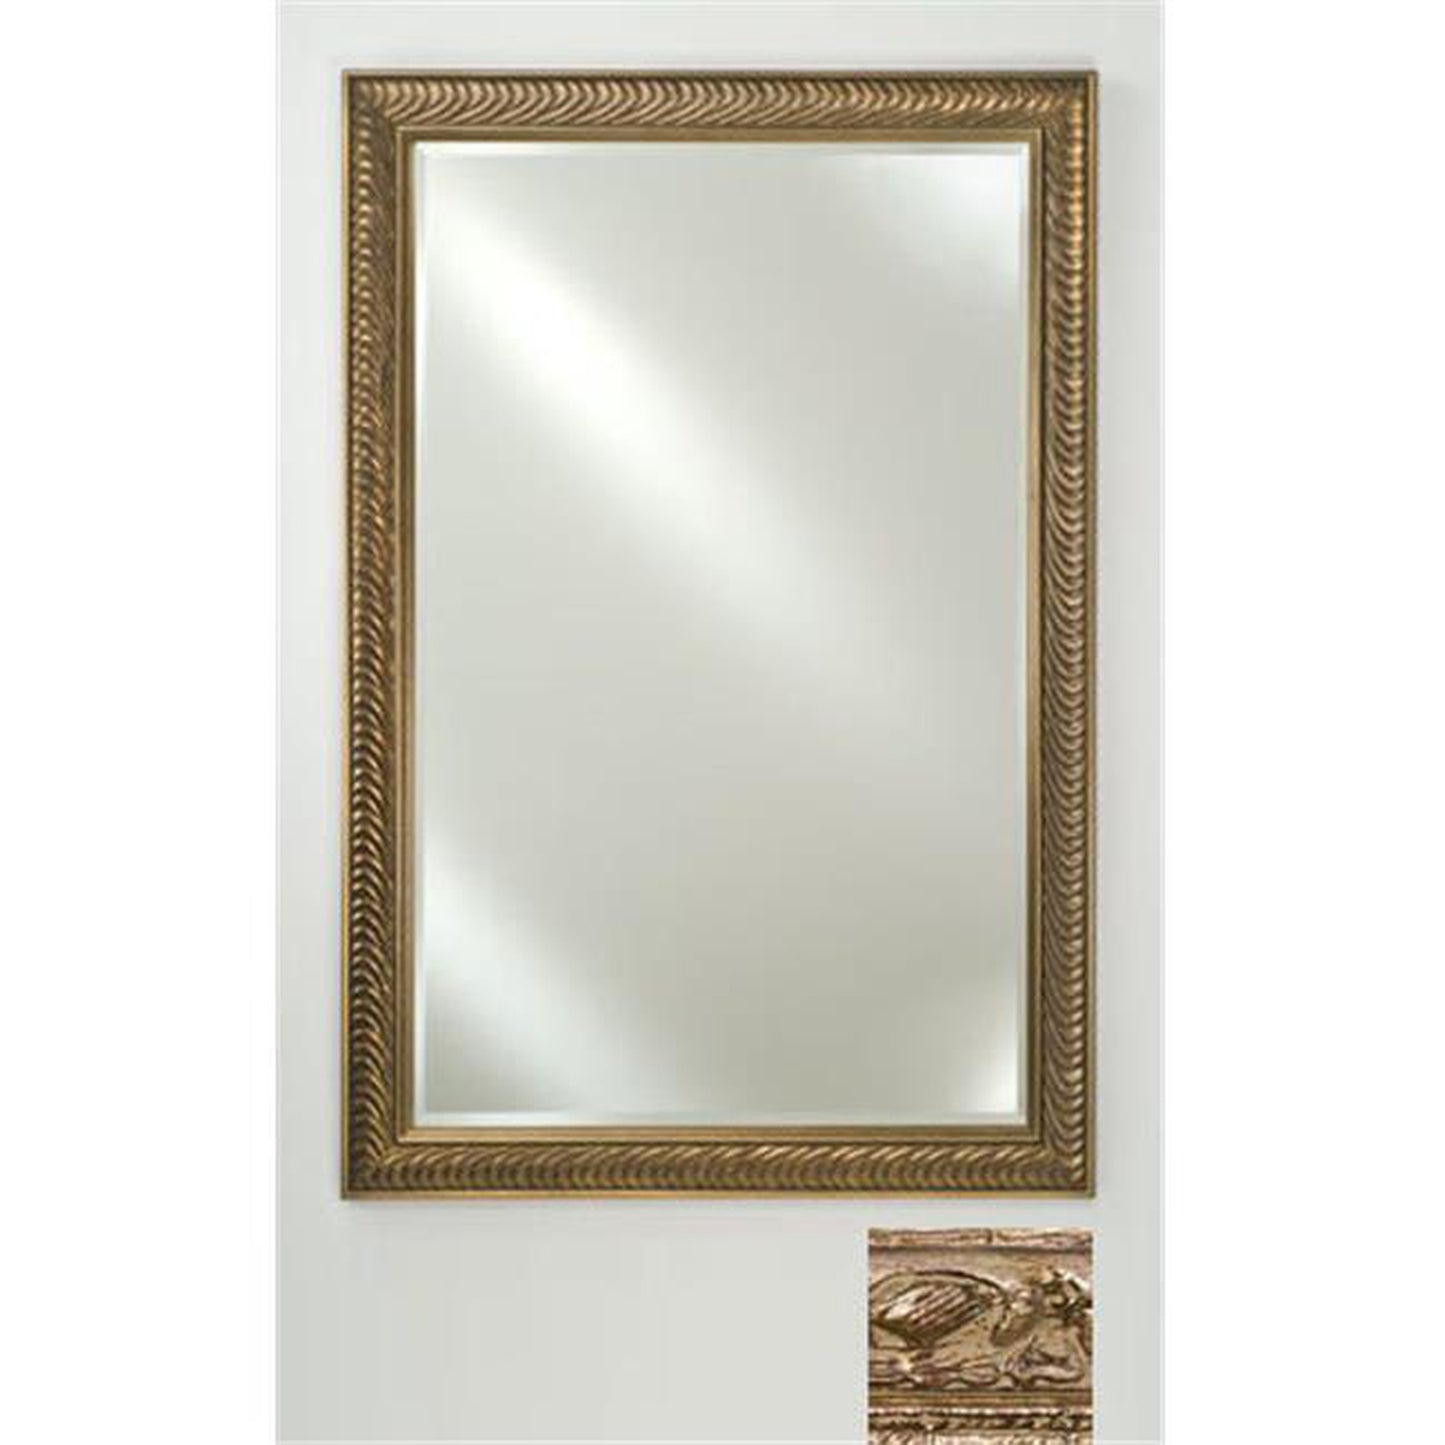 Afina Signature 16" x 22" Tuscany Antique Silver Framed Mirror With Beveled Edge